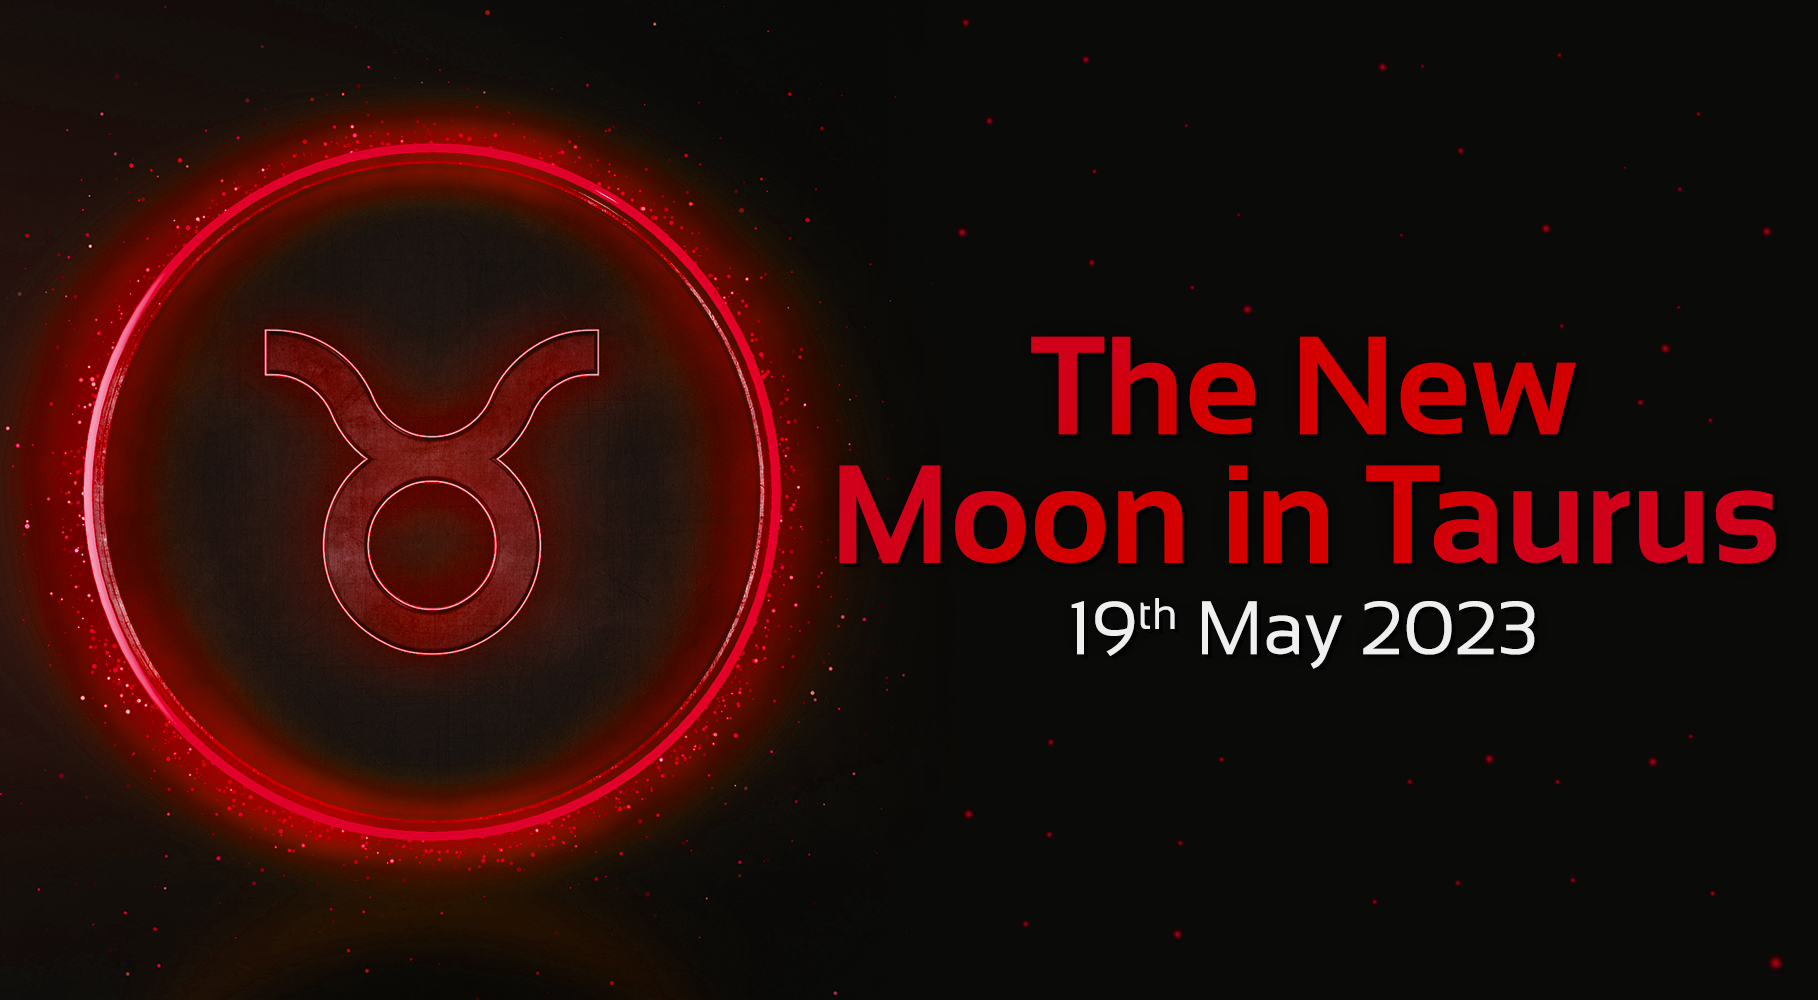 black background with glowing Taurus symbol on the left side inside a glowing circle. Red text on the right side that says 'The New Moon in Taurus' and white text under it that says '19th May 2023'